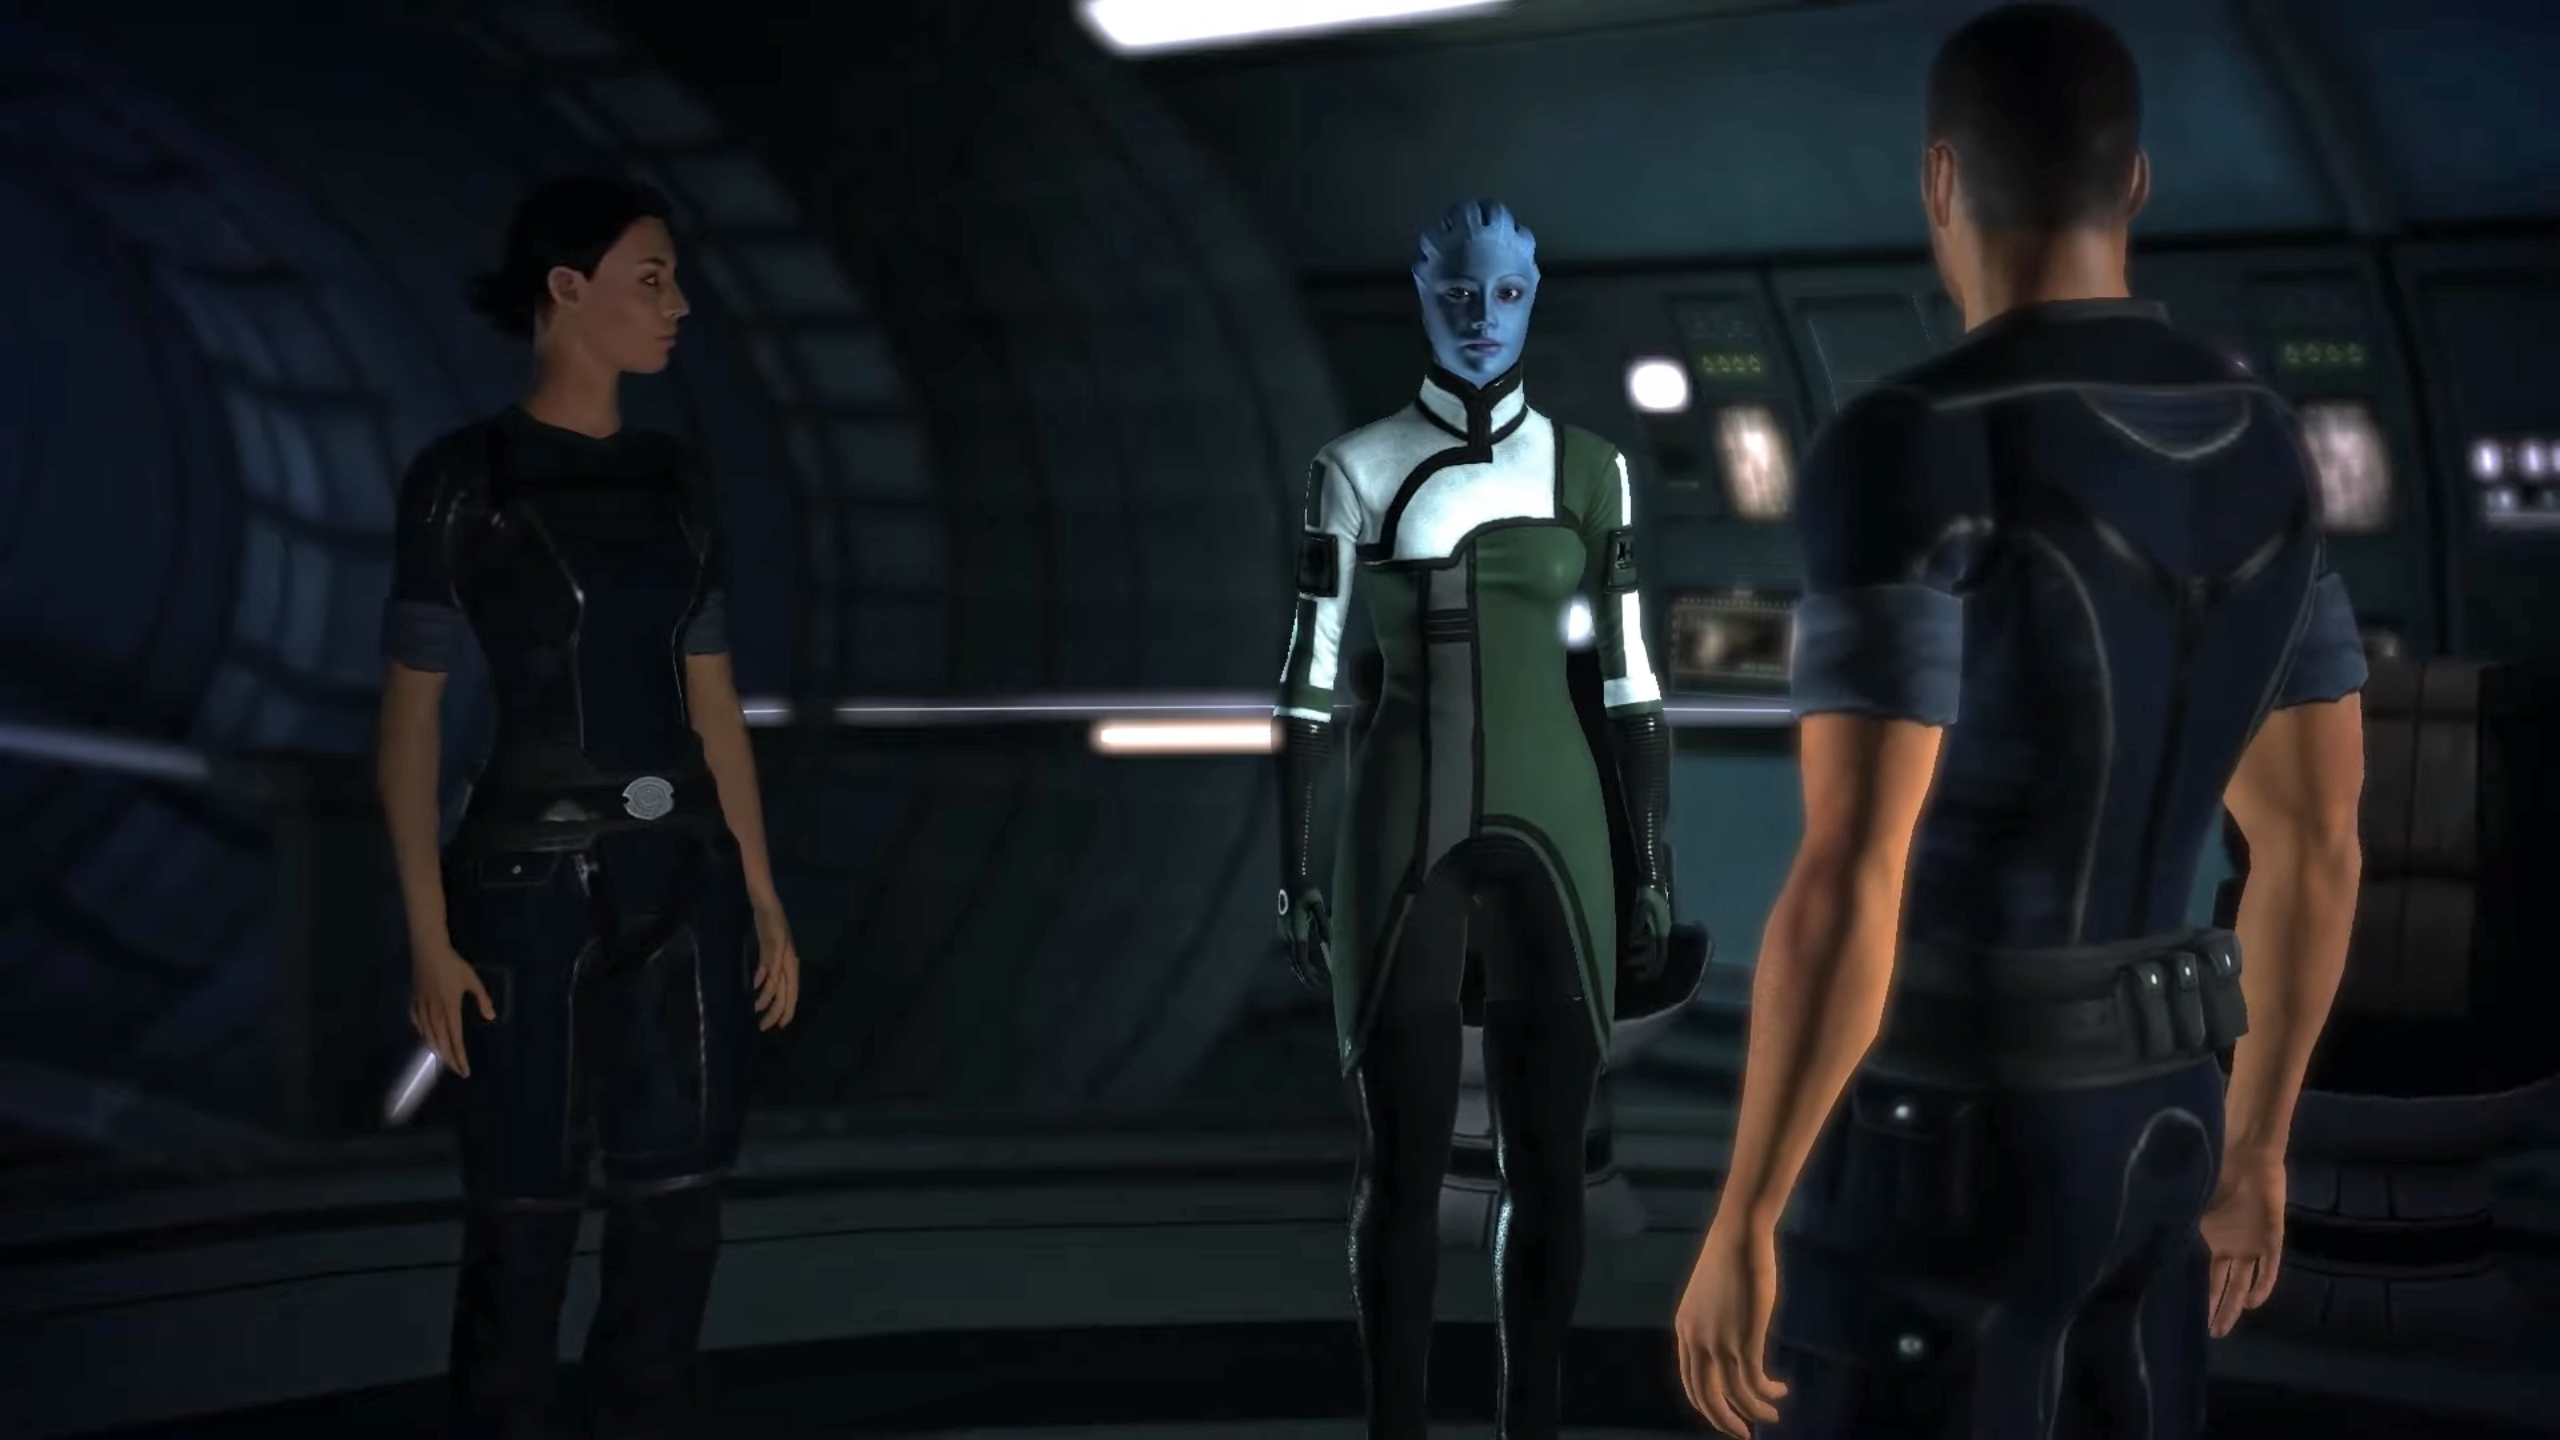 Ashley Williams (left) and Liara T'Soni (right) confront Commander Shepard after he expresses romantic interest in both of them, forcing him to pick who he truly feels affection for. (Screenshot: Bioware/EA)